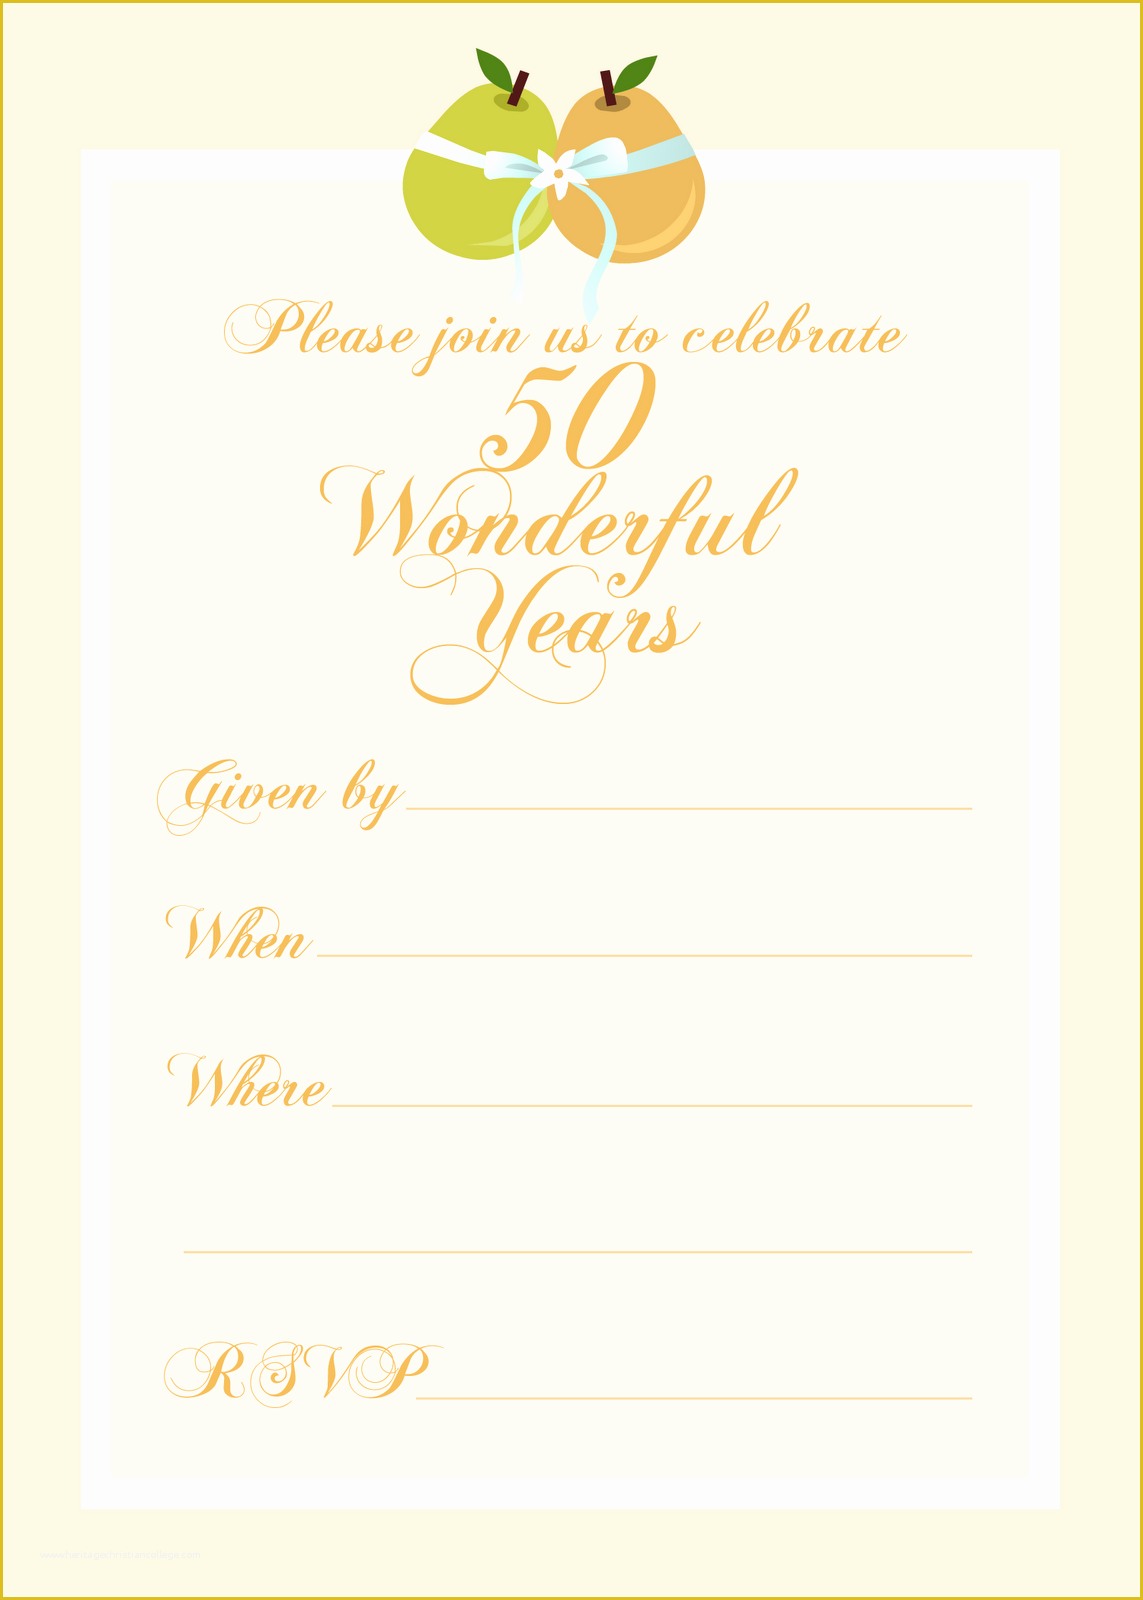 50th Anniversary Templates Free Of Free Printable Party Invitations Free 50th Wedding